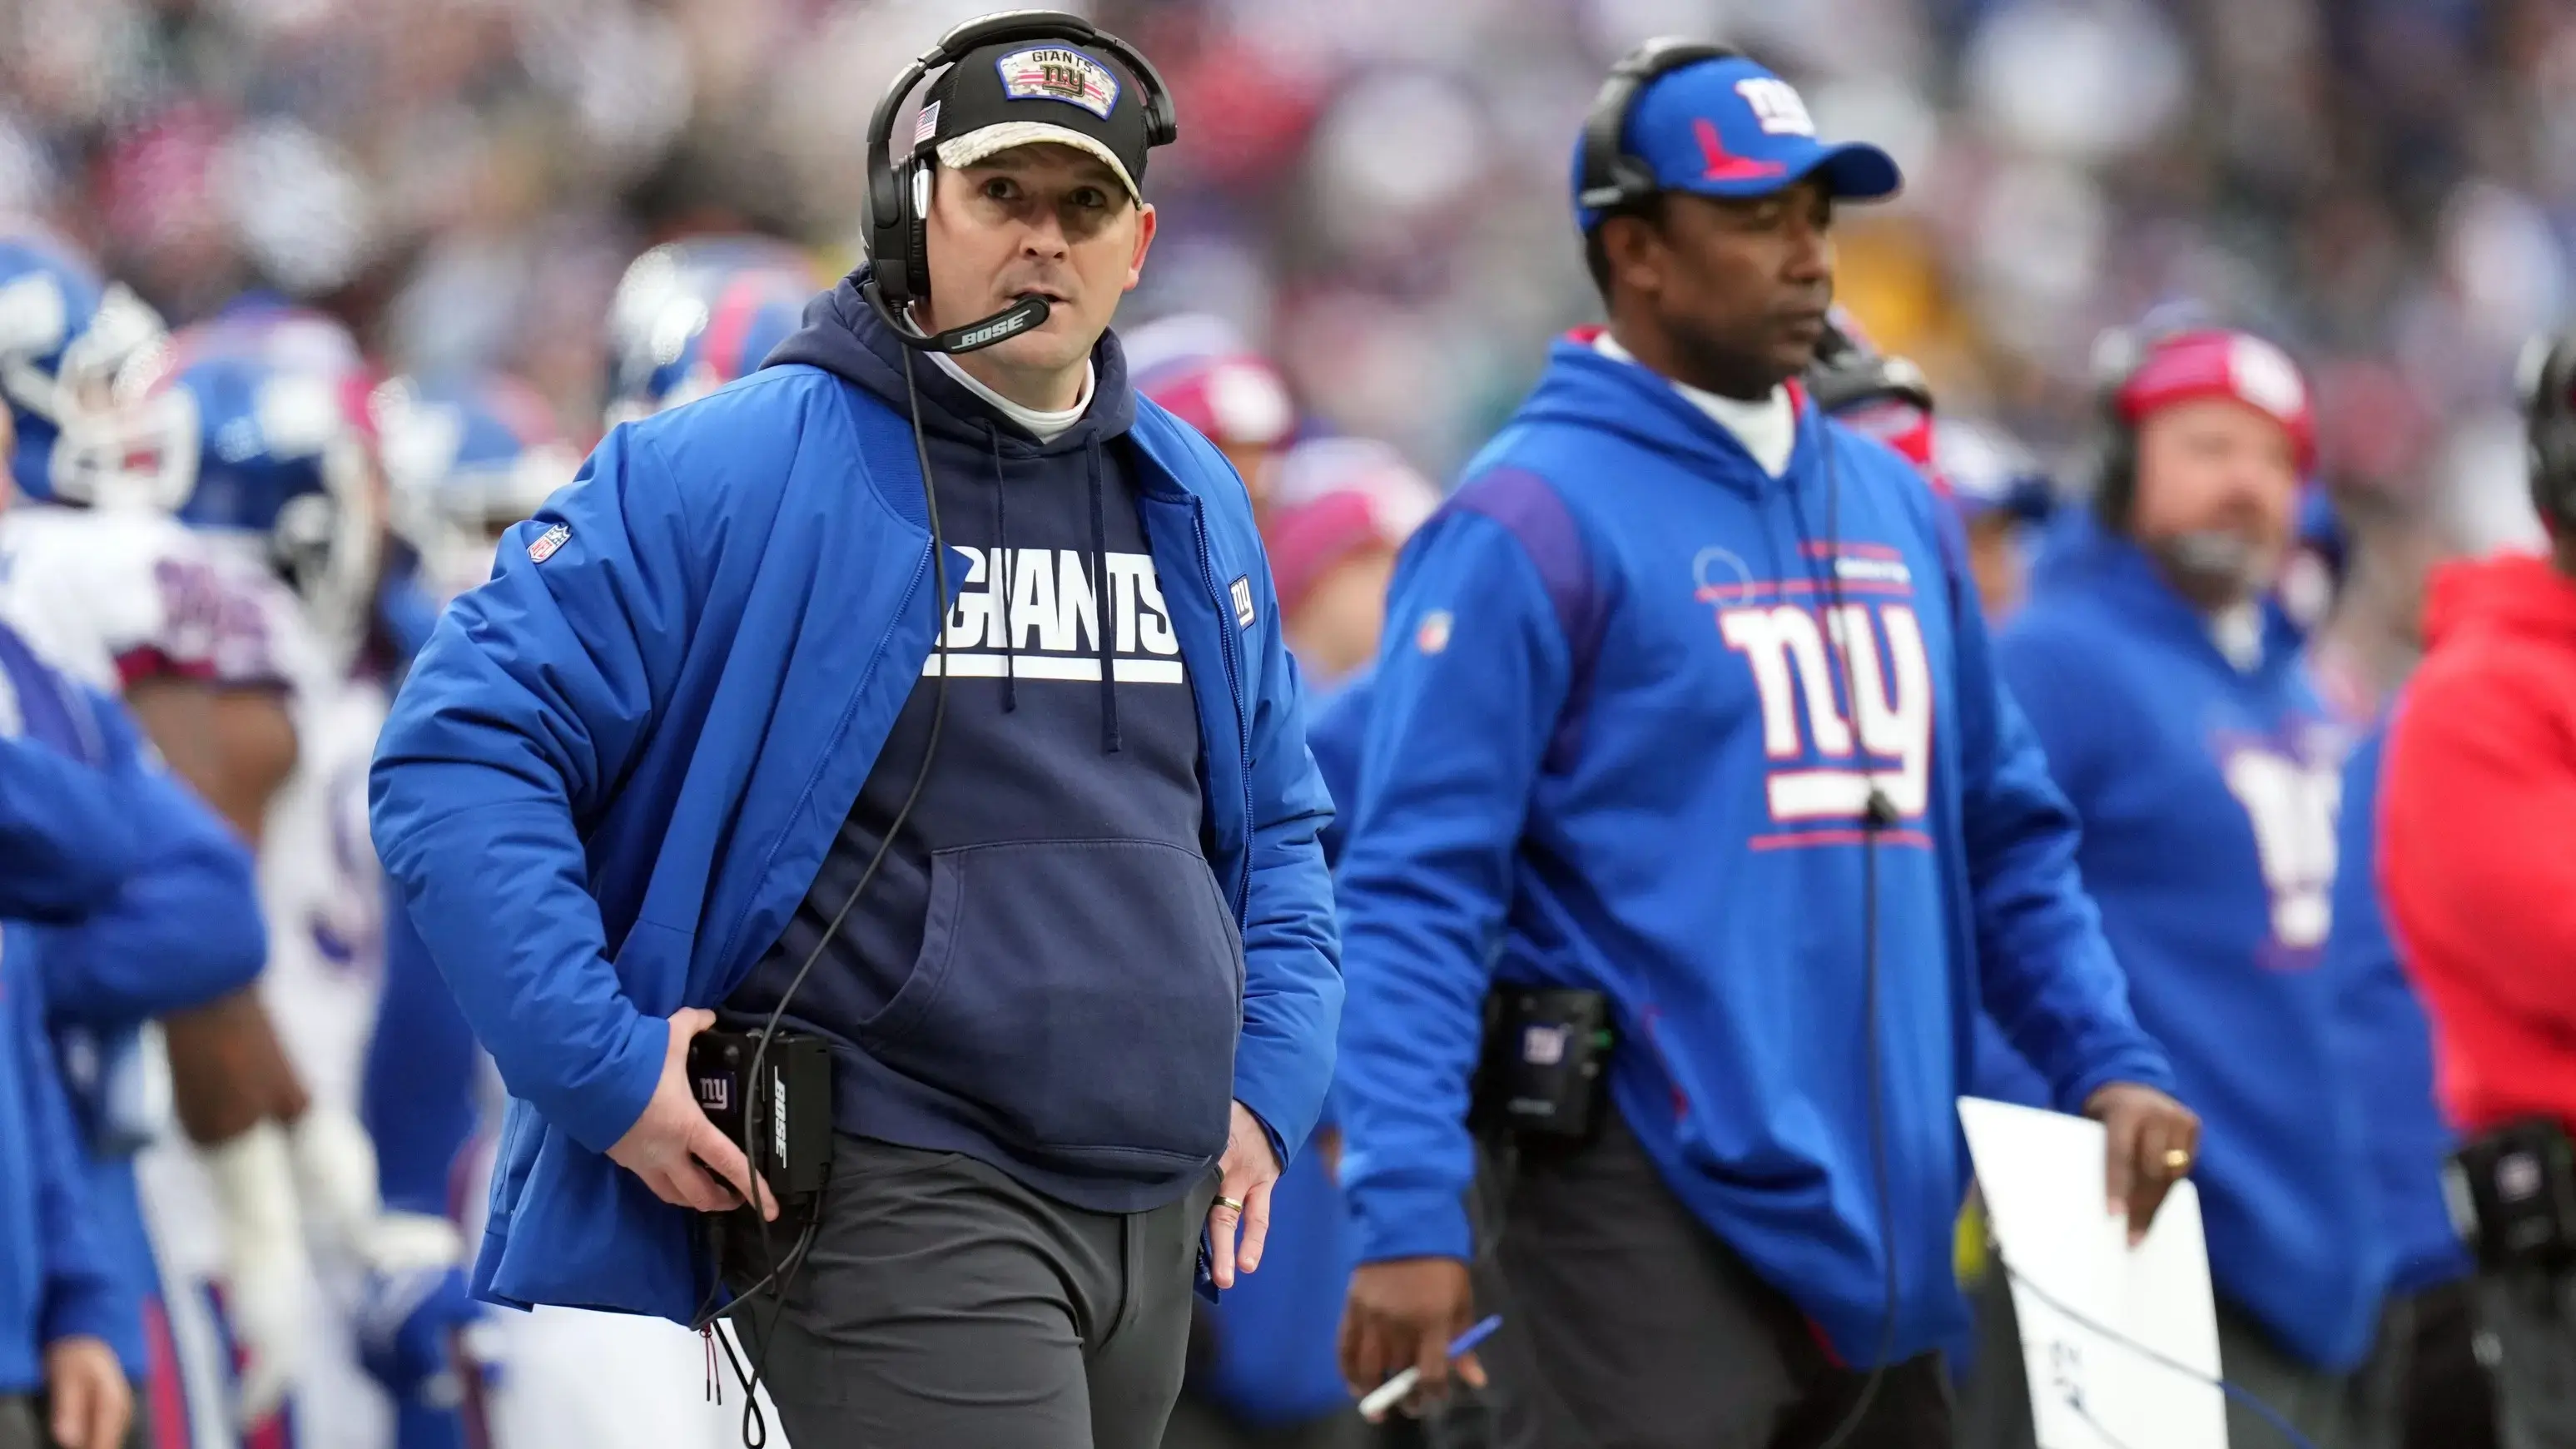 New York Giants head coach Joe Judge, left, and defensive coordinator Patrick Graham in the first half. The Giants defeat the Eagles, 13-7, at MetLife Stadium on Sunday, Nov. 28, 2021, in East Rutherford. Nyg Vs Phi / Danielle Parhizkaran/NorthJersey.com / USA TODAY NETWORK